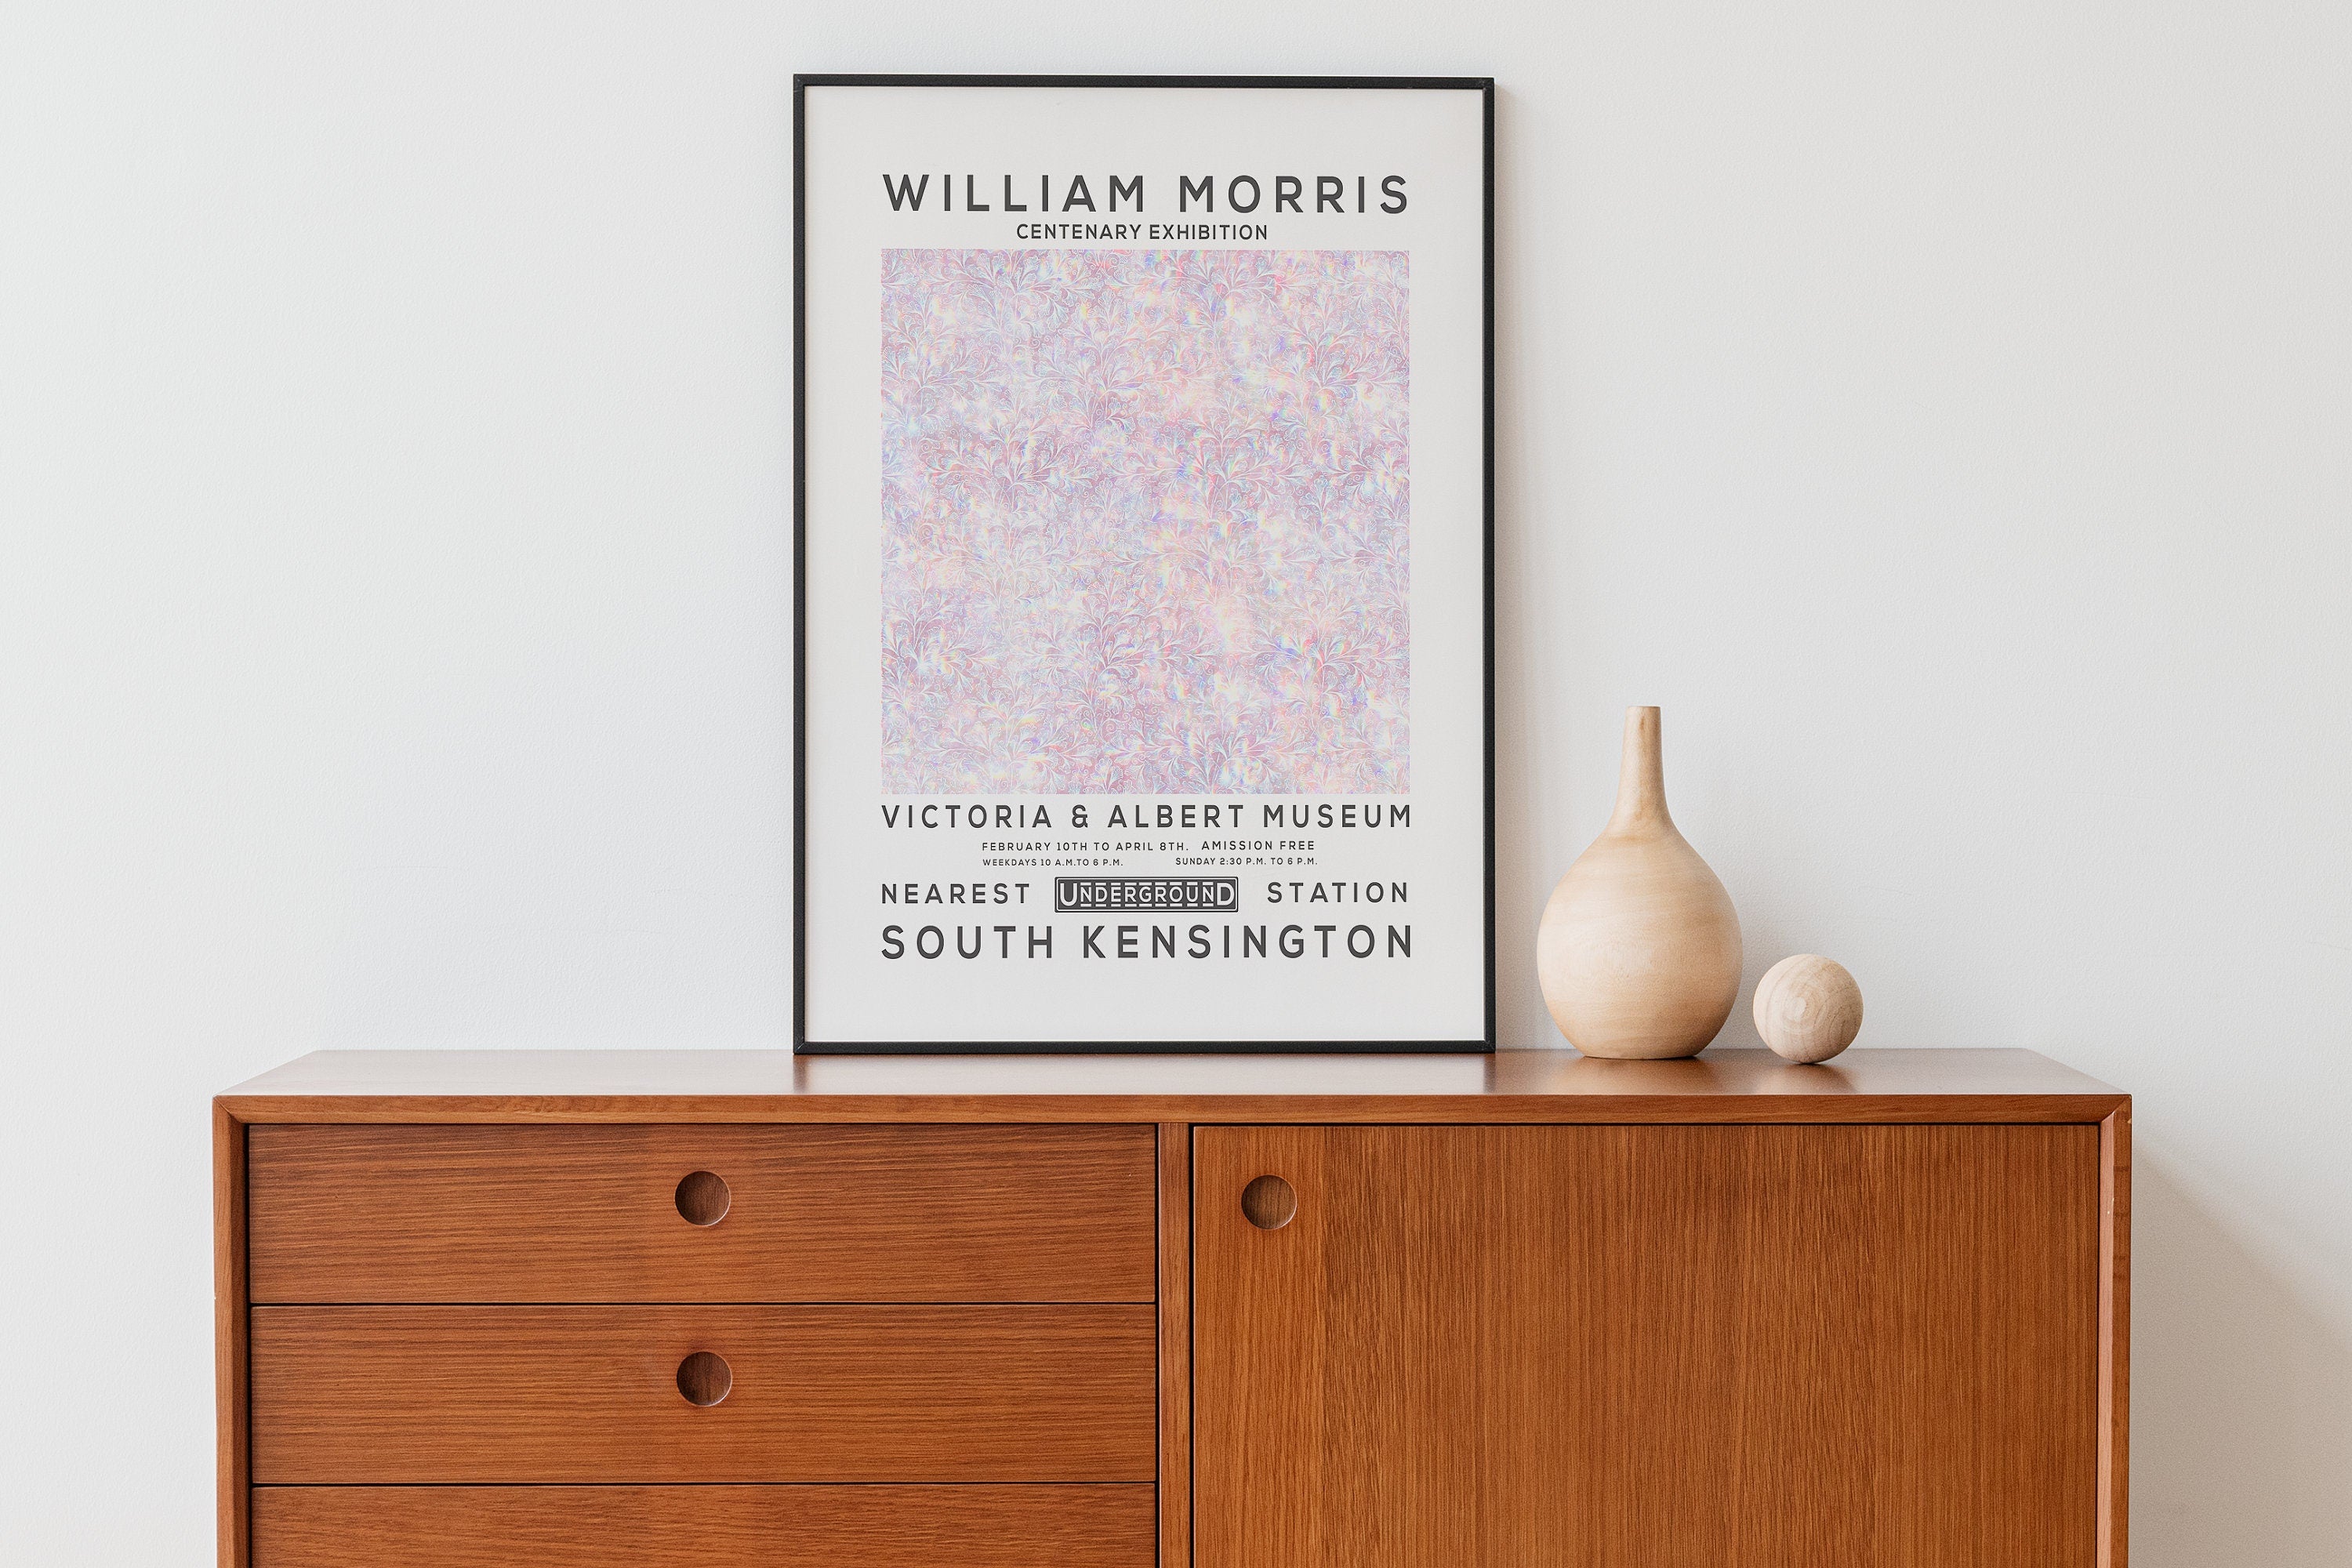 William Morris Print, Vintage Wall Decor, Exhibition Poster, Floral Wall Art, Flower Print, Home Decor, Holographic 01